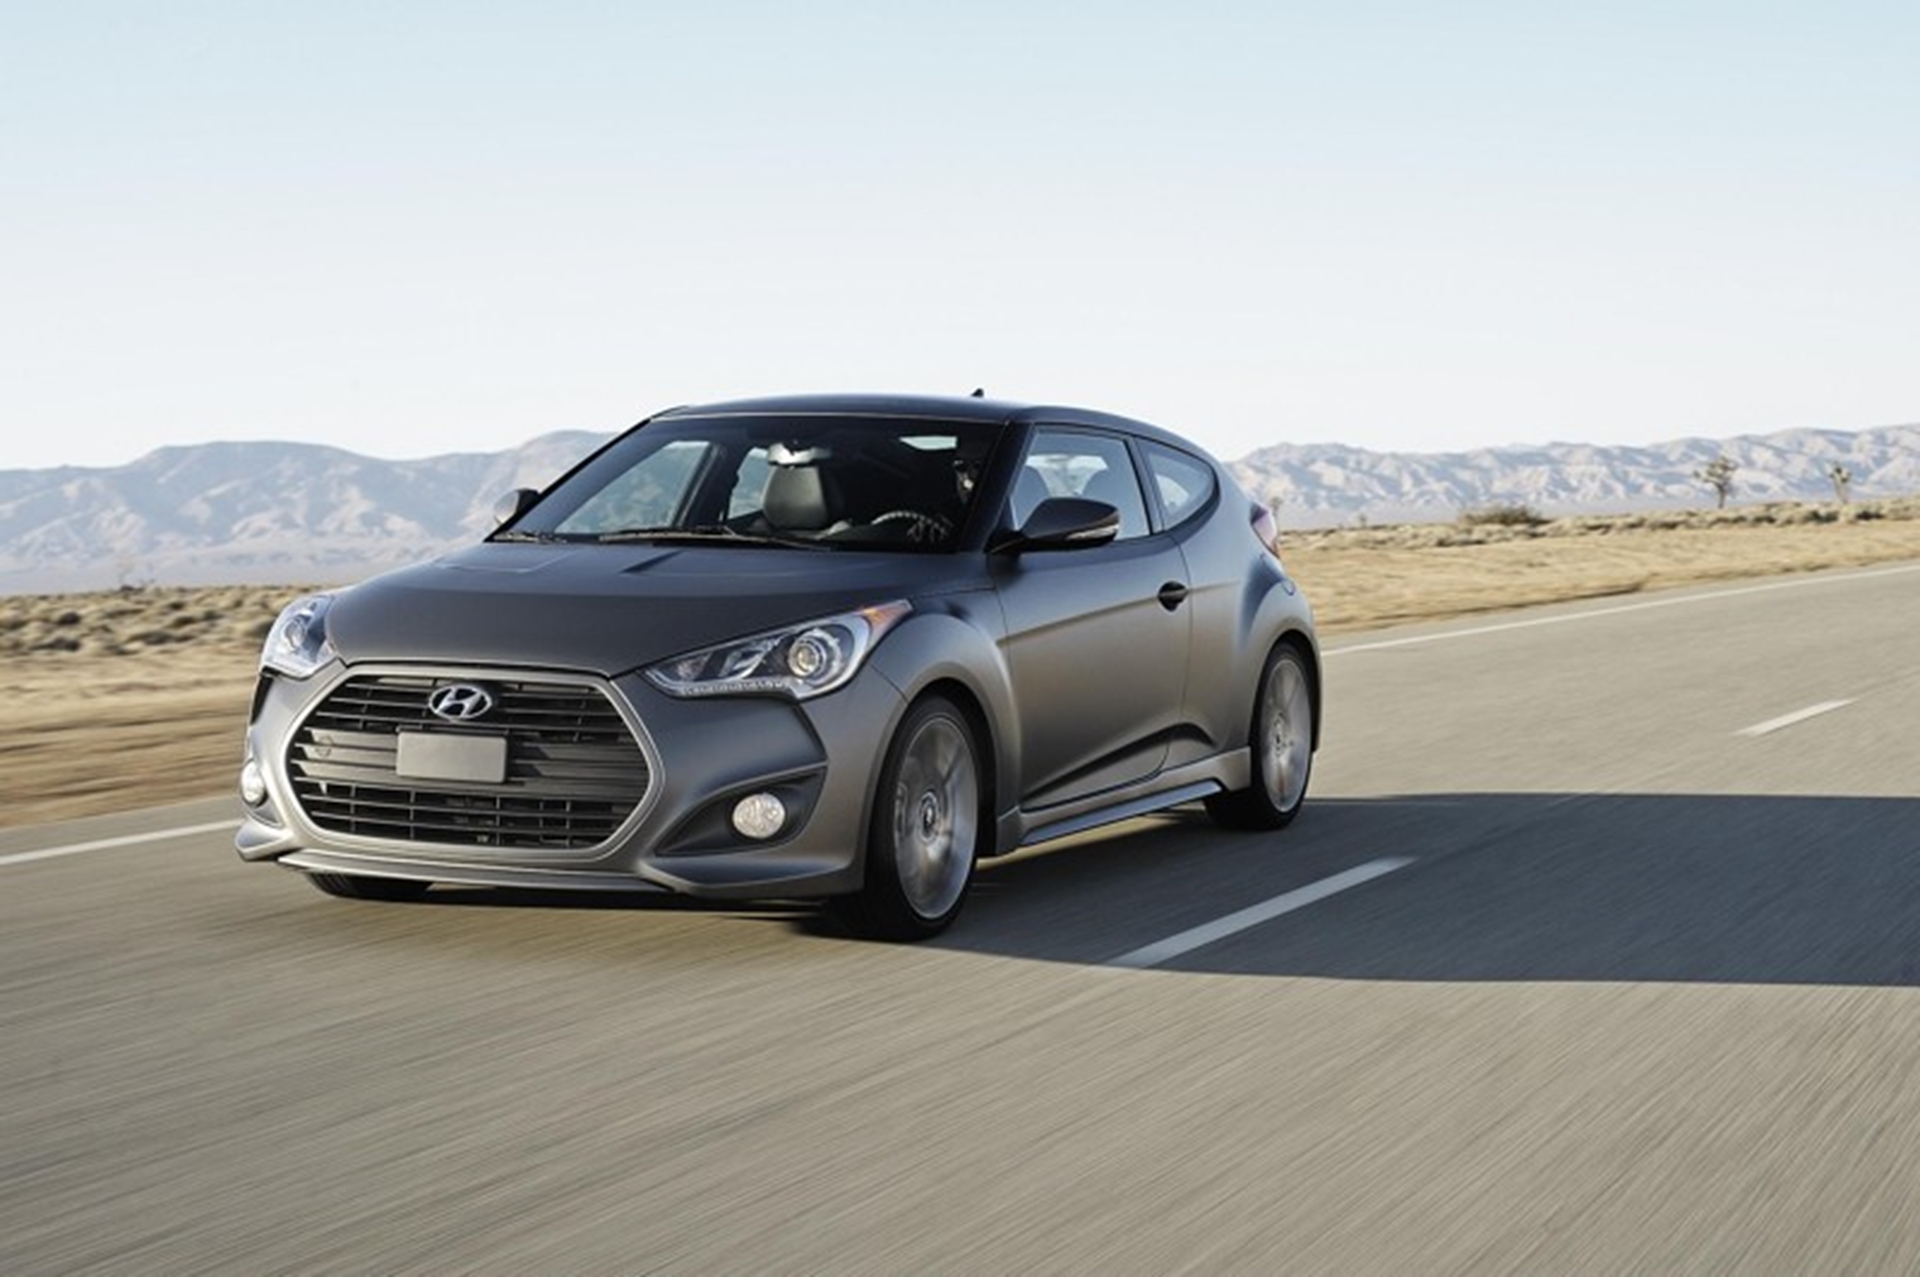 2012 HYUNDAI VELOSTER NAMED ONE OF THE 10 COOLEST NEW CARS UNDER $18,000 BY KELLEY BLUE BOOK’S